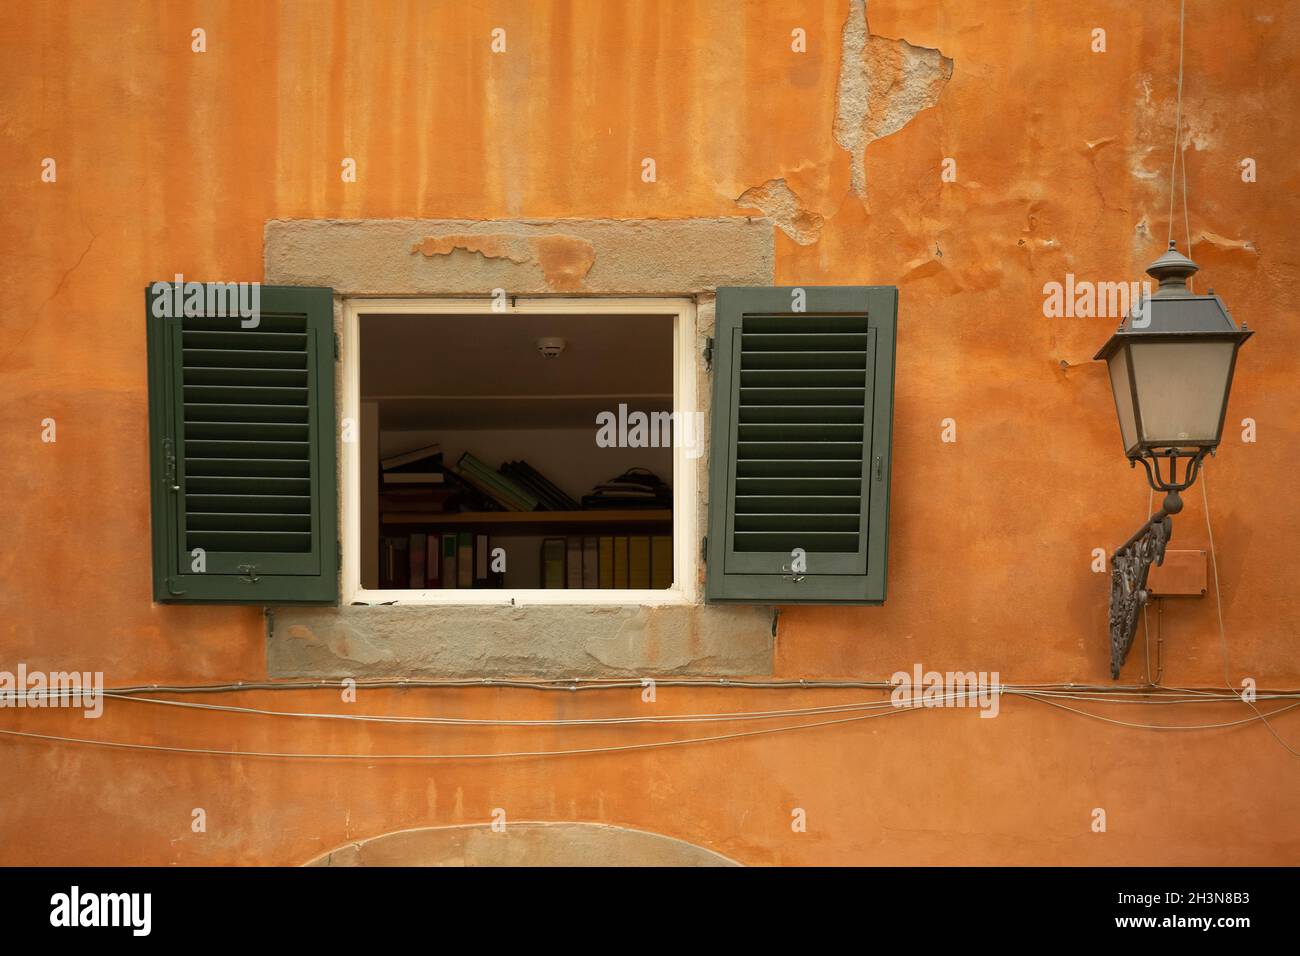 Opened window with green shutters on orange wall of old building Stock Photo